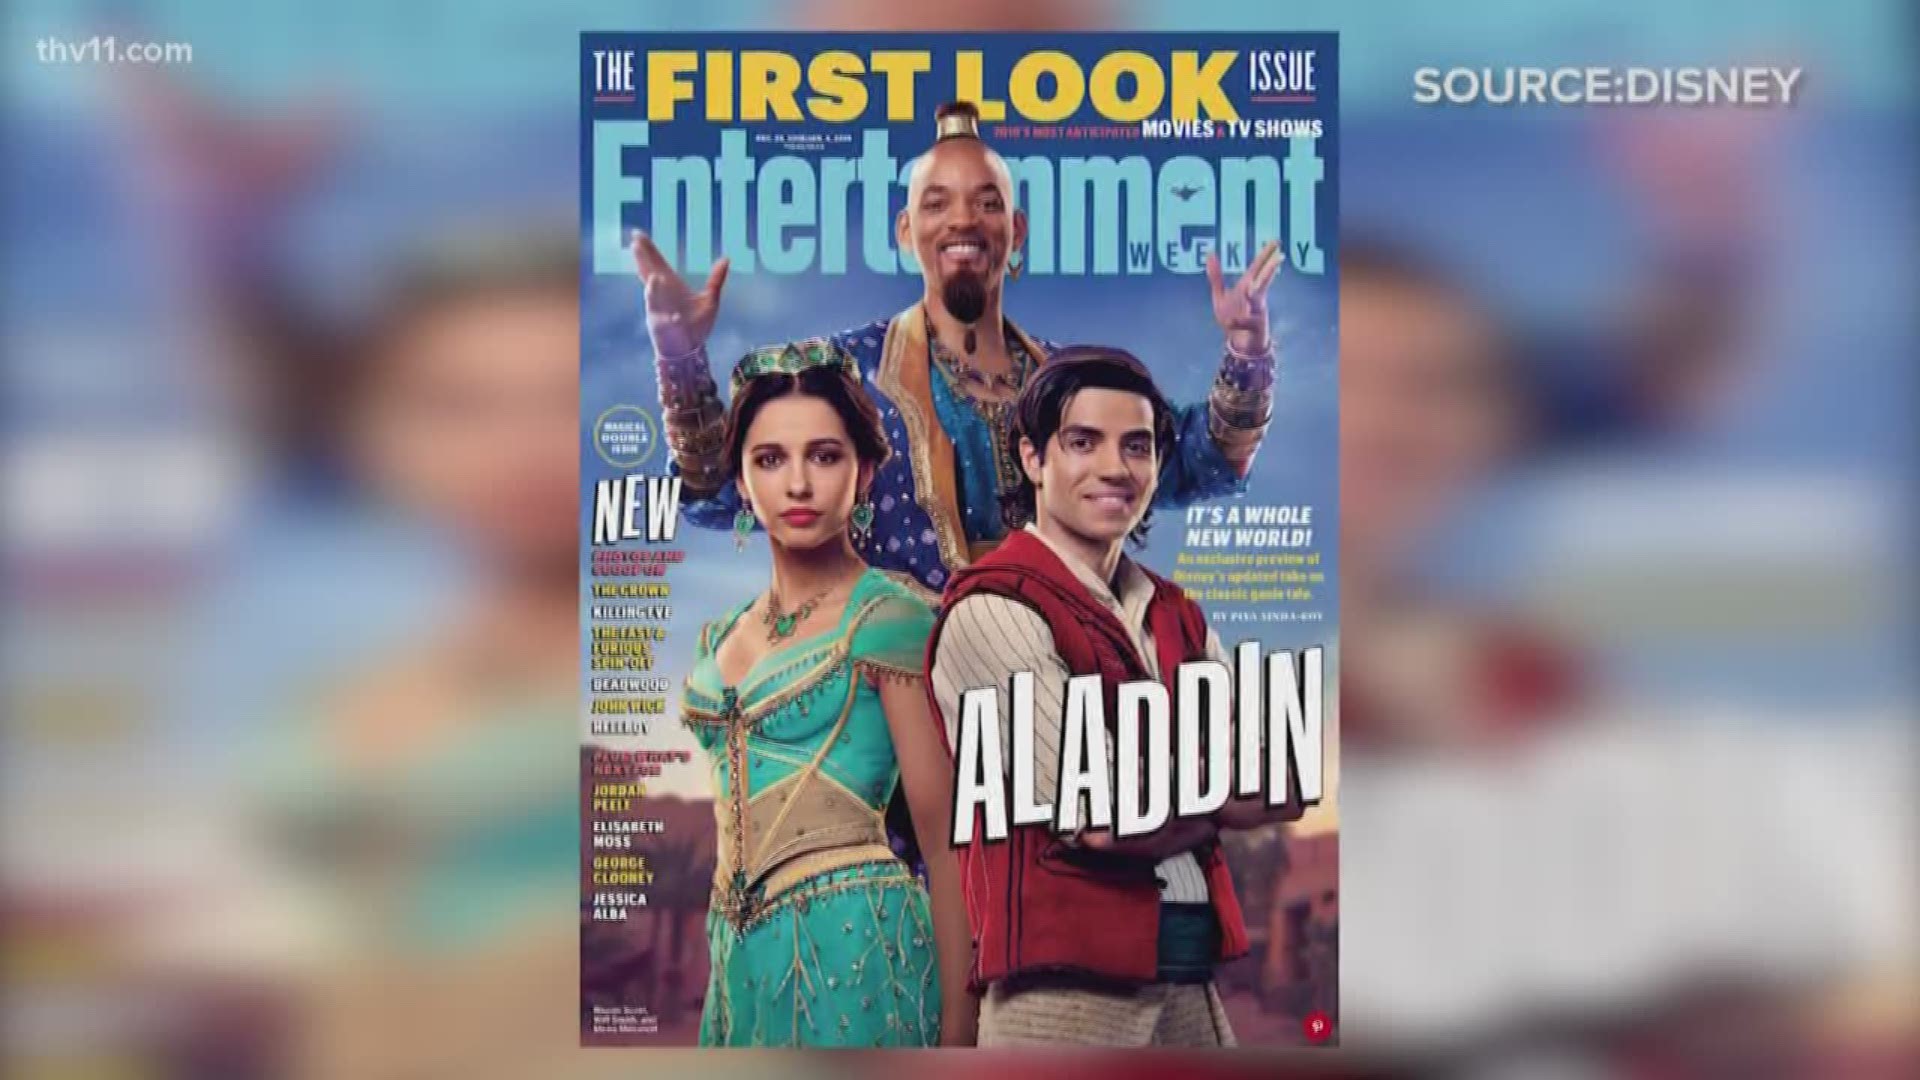 We take a look at how everyone is reacting to the first look at "Aladdin" and Macauley Culkin's appearance in a "Home Alone"-themed Google ad.